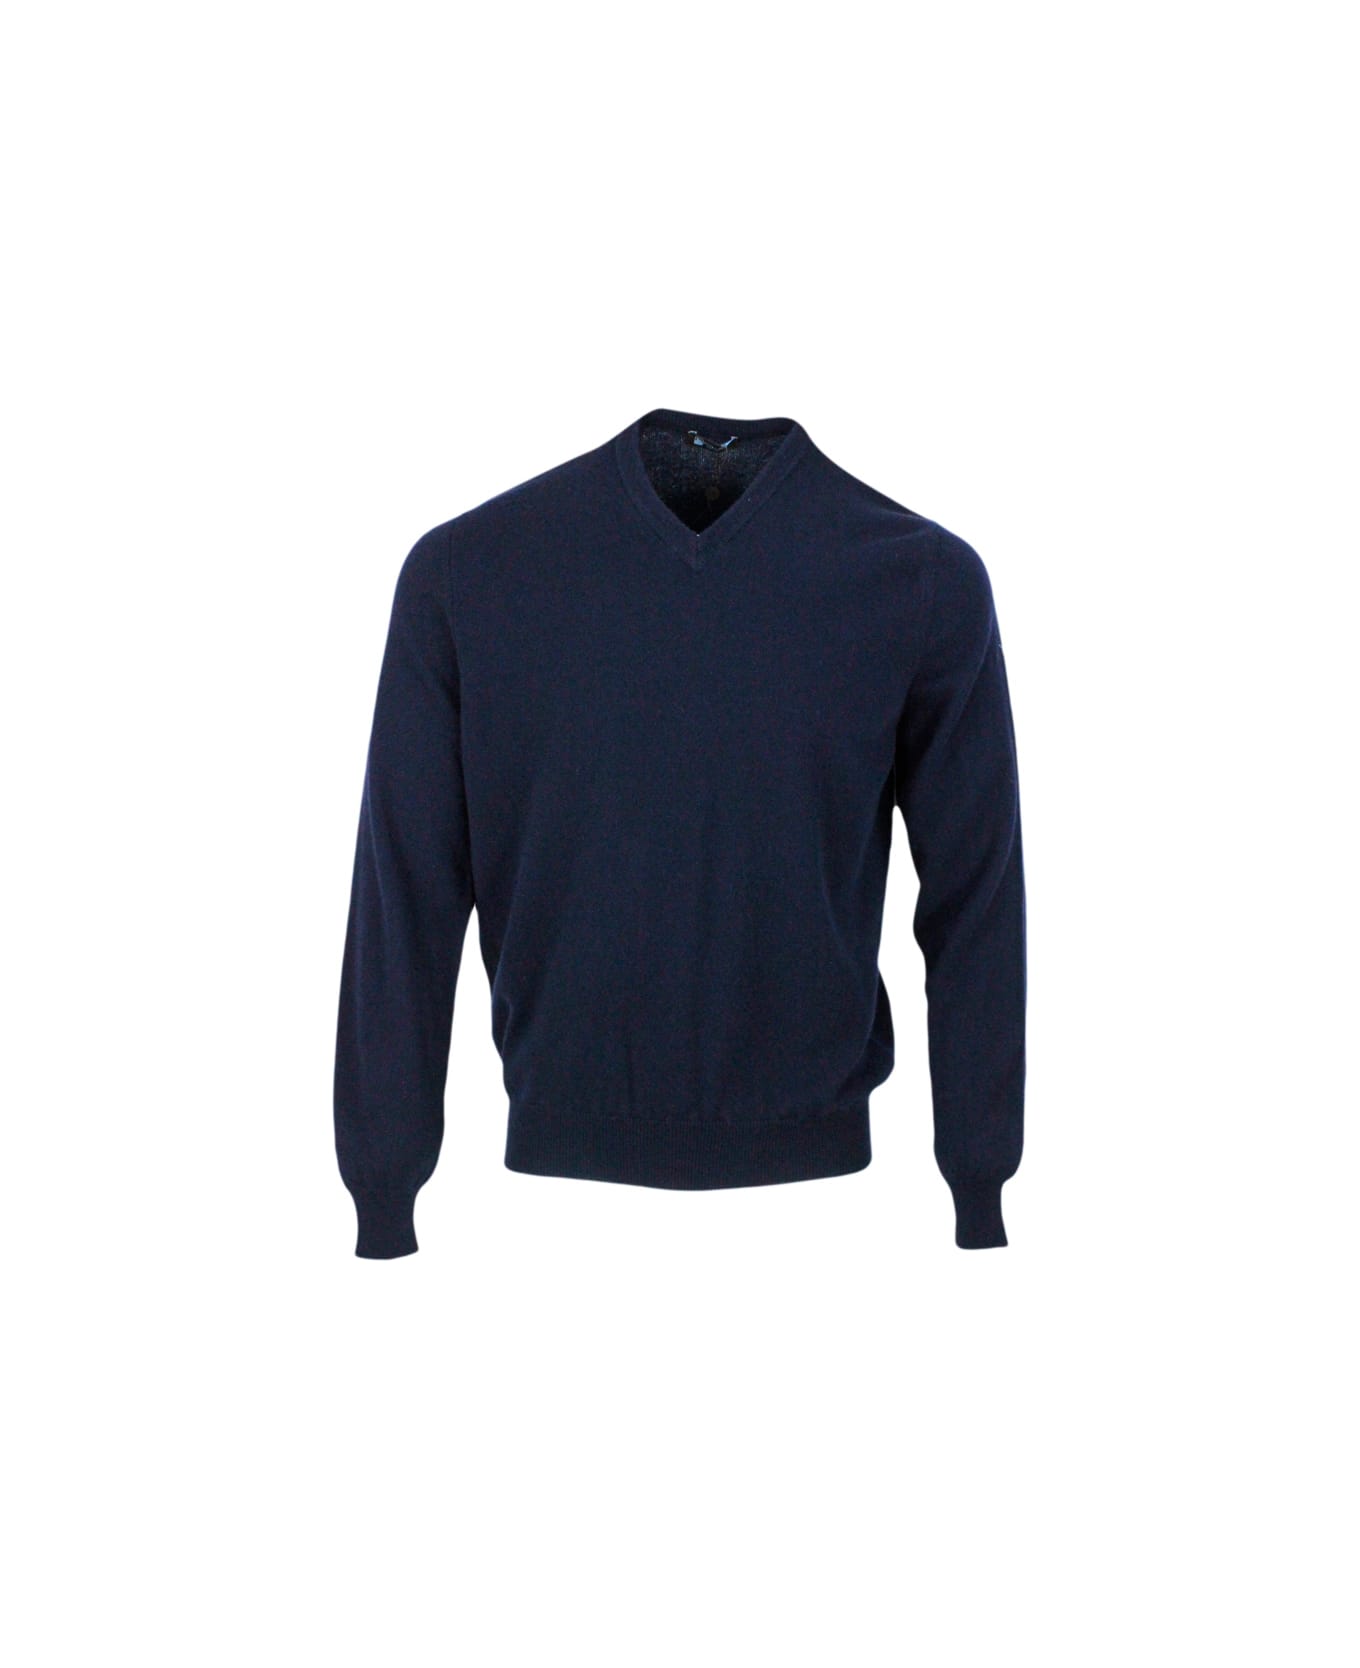 Colombo Long-sleeved V-neck Sweater In Fine 2-ply 100% Kid Cashmere With Special Processing On The Edge Of The Neck - Blu navy ニットウェア